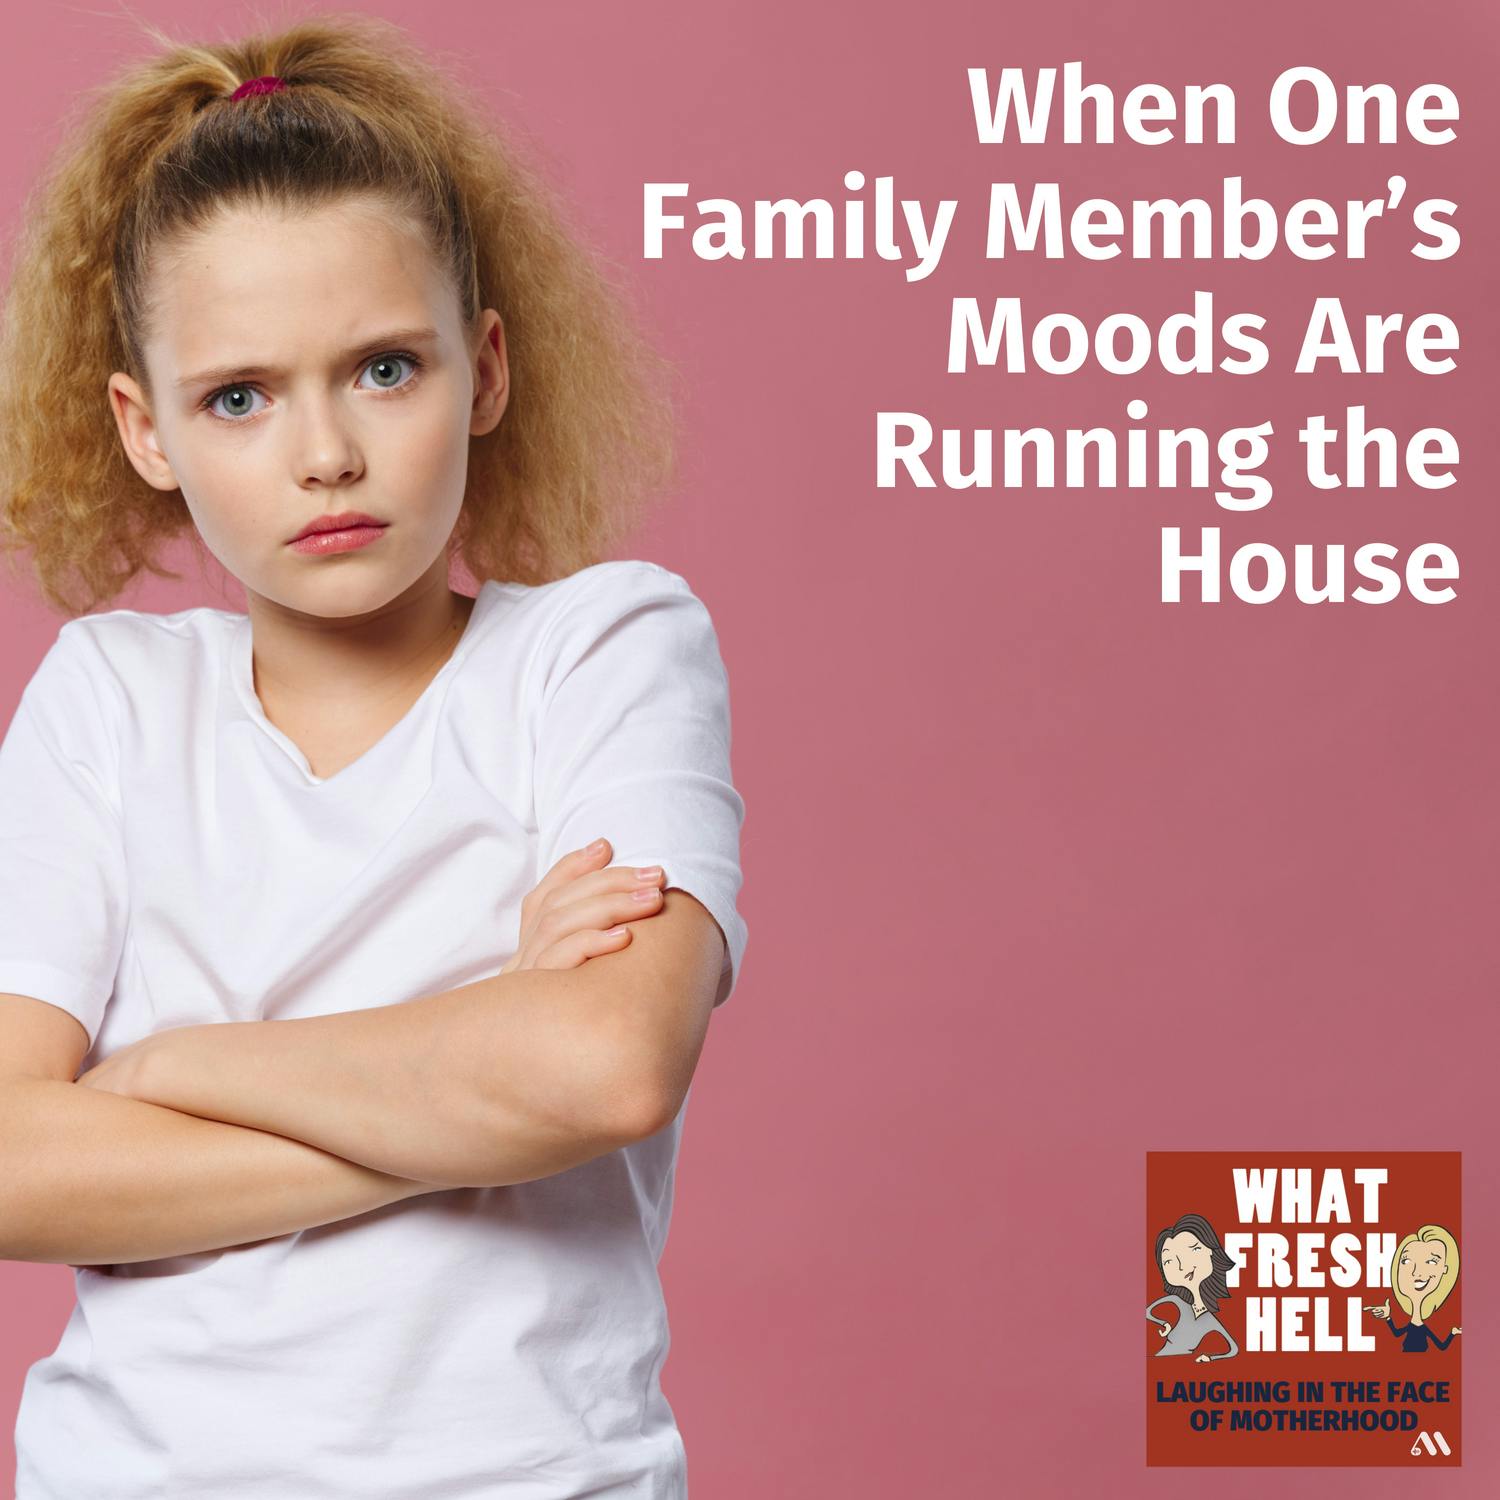 When One Family Member’s Moods Are Running the House